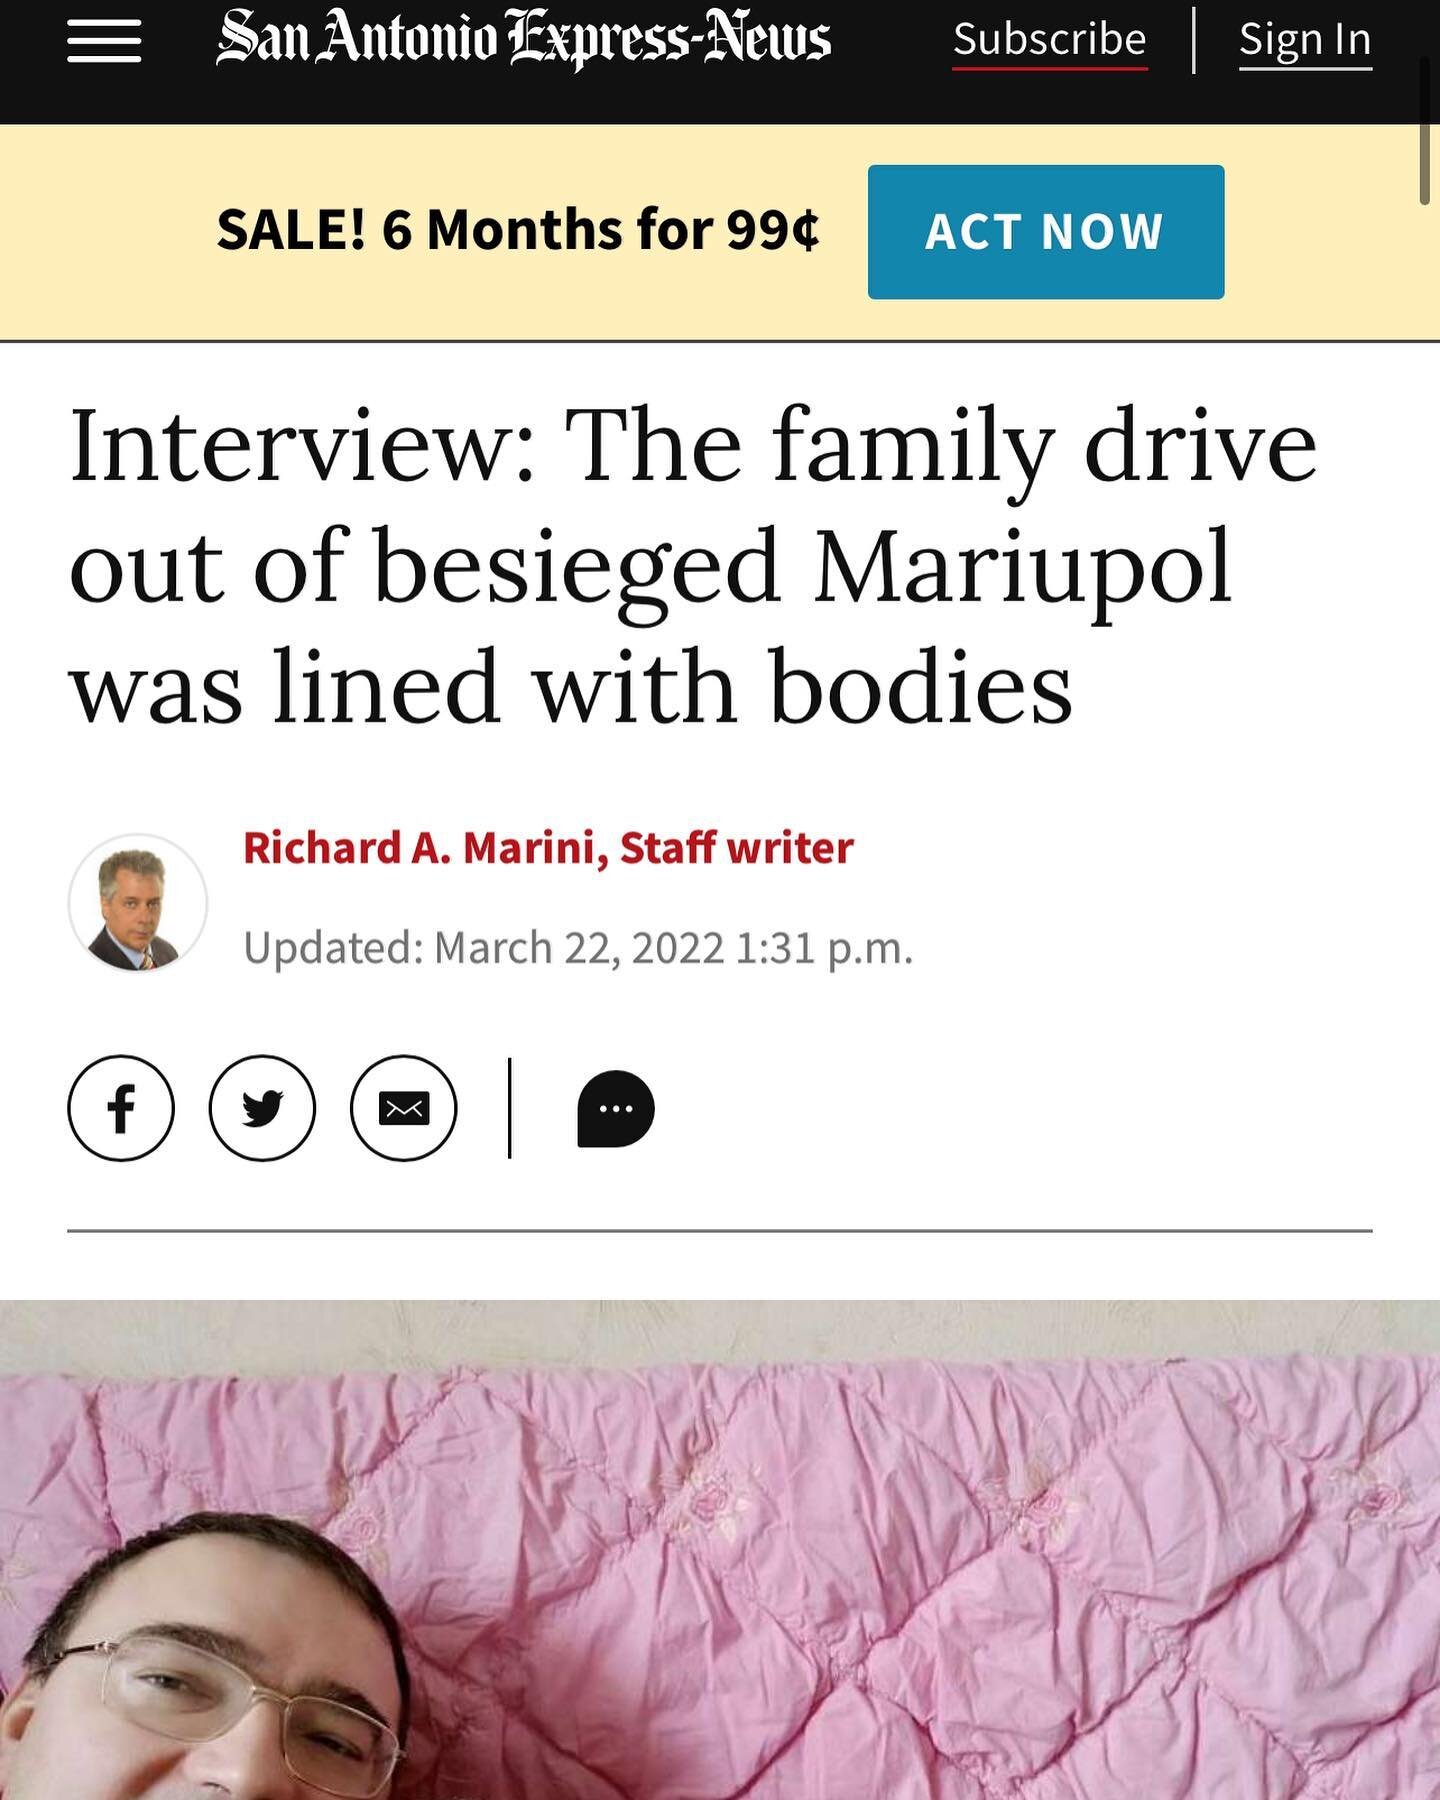 https://www.expressnews.com/news/local/article/family-drive-mariupol-bodies-17020865.php